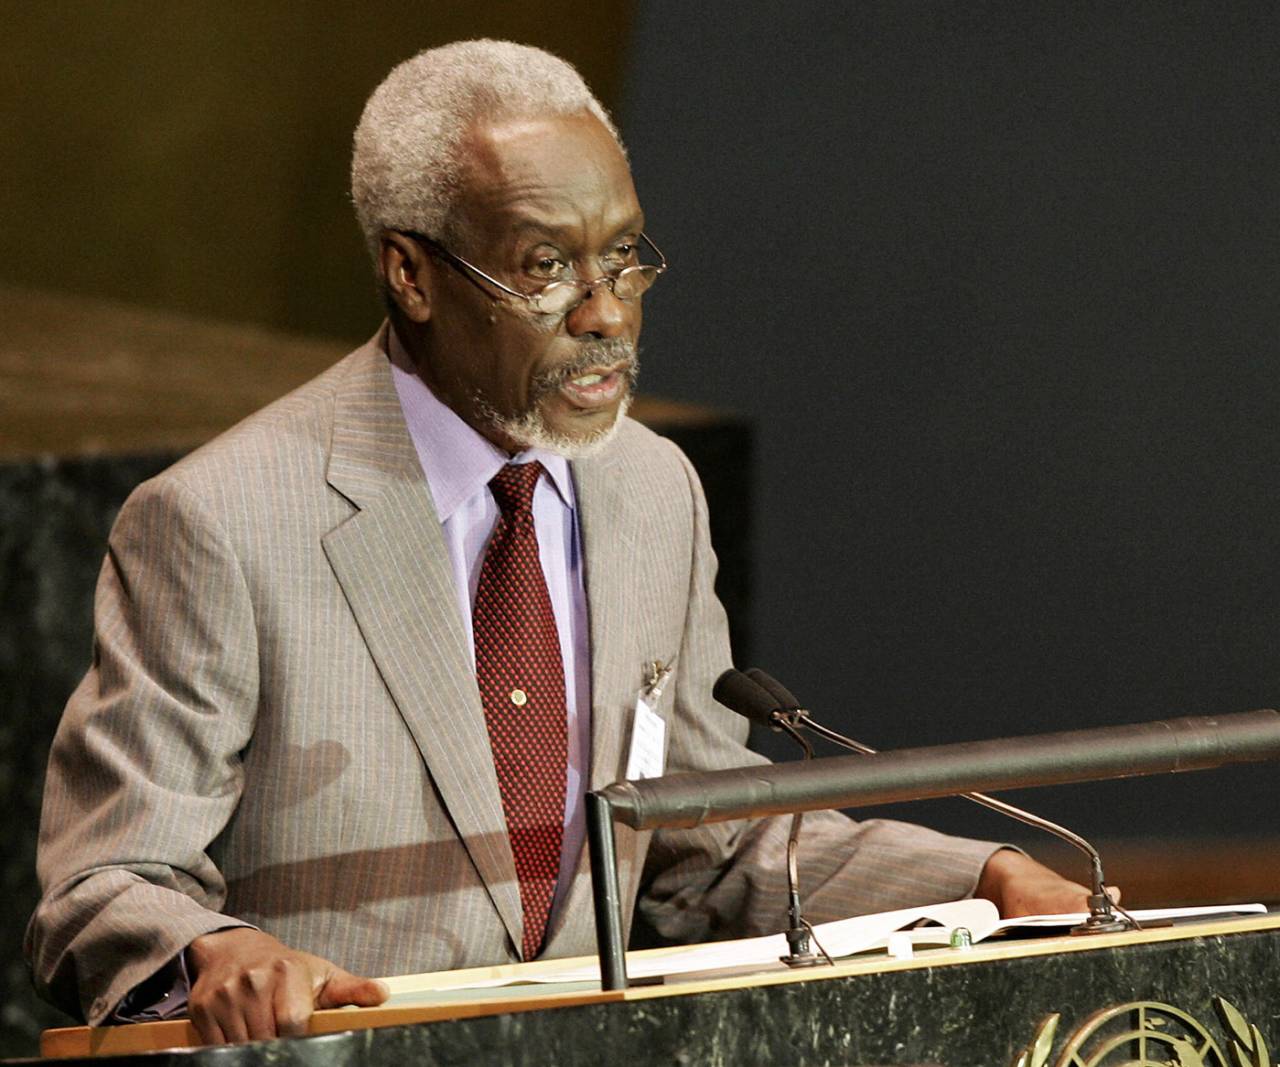 PJ Patterson, the prime minister of Jamaica, addresses the 2005 World Summit at the 60th session of the United Nations General Assembly in New York, September 14, 2005